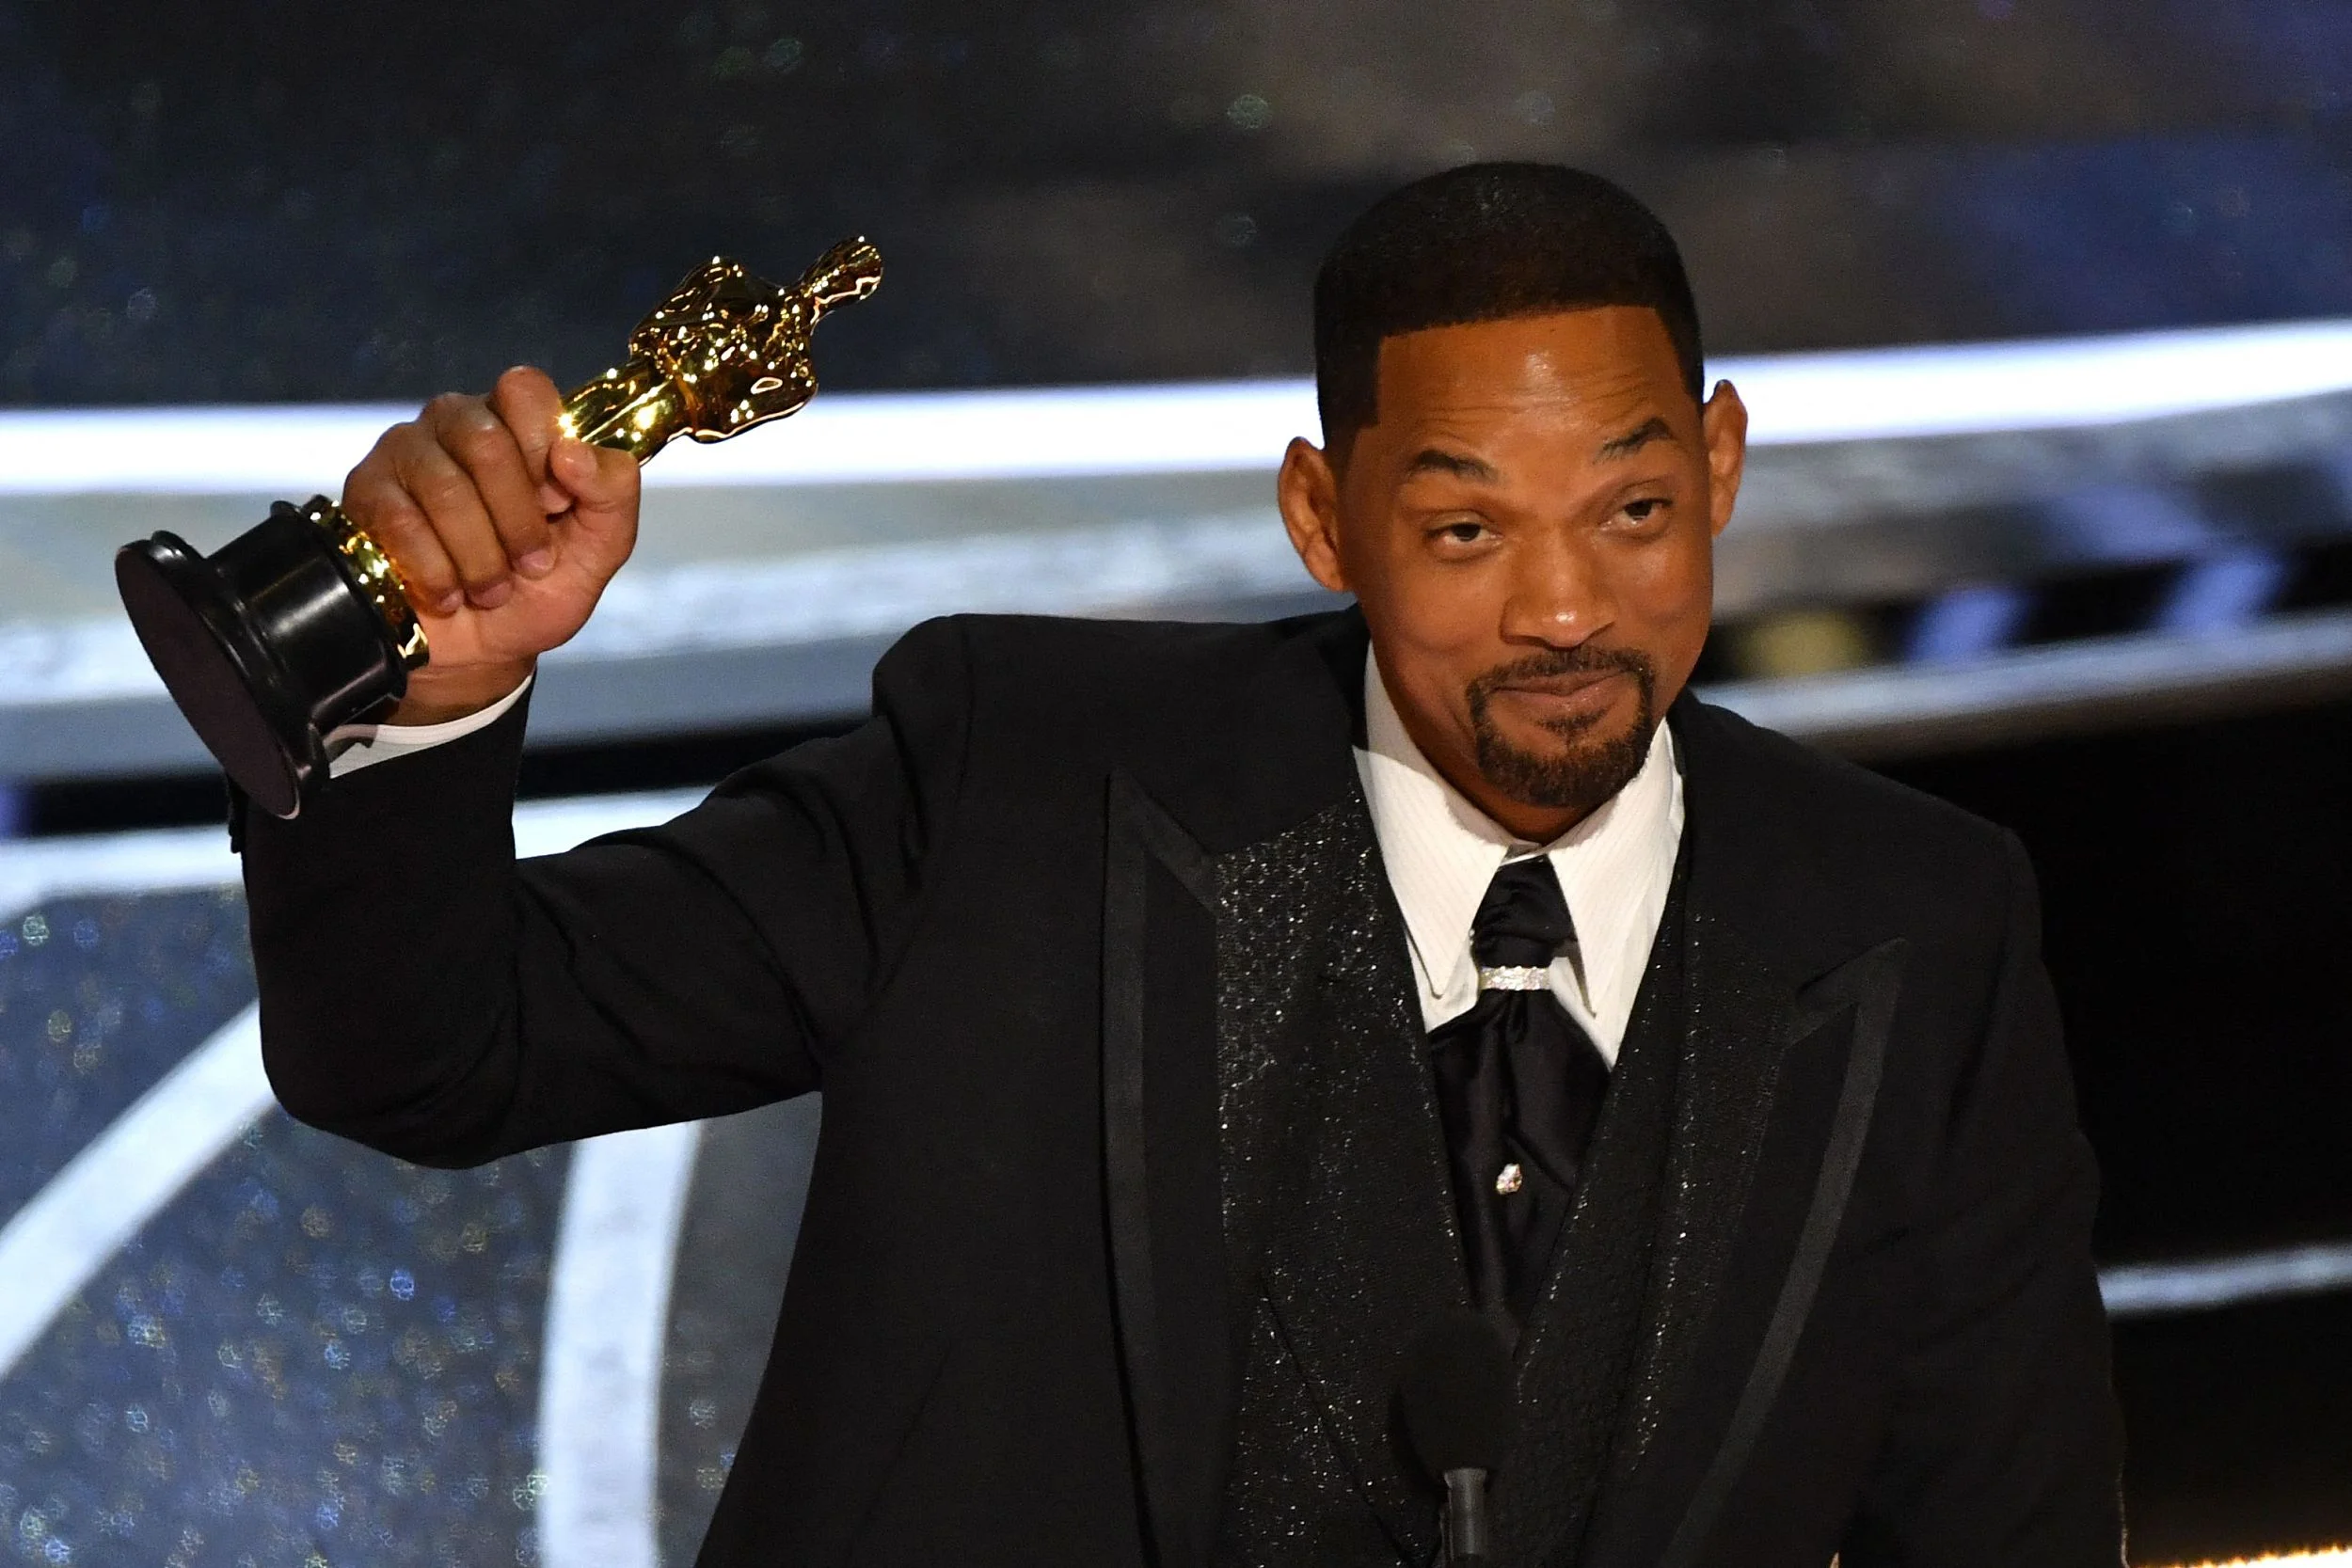 Will Smith slaps Chris Rock at the Oscars, and he apologizes to the Oscar committee afterwards